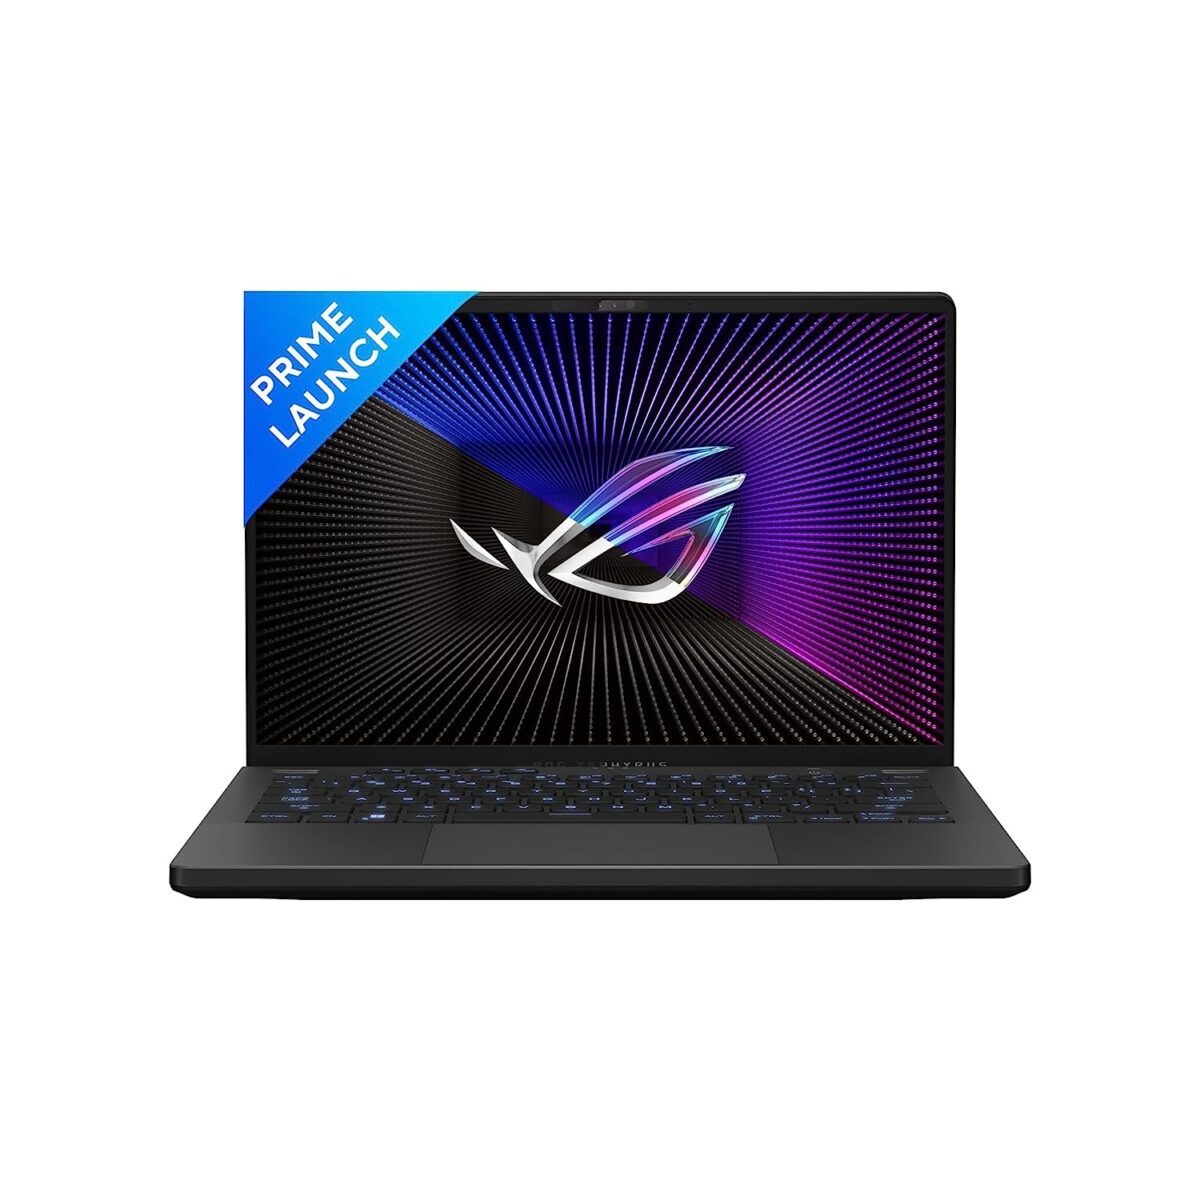 ASUS ROG Zephyrus G14 GA402NJ-L8094WS Launched in India